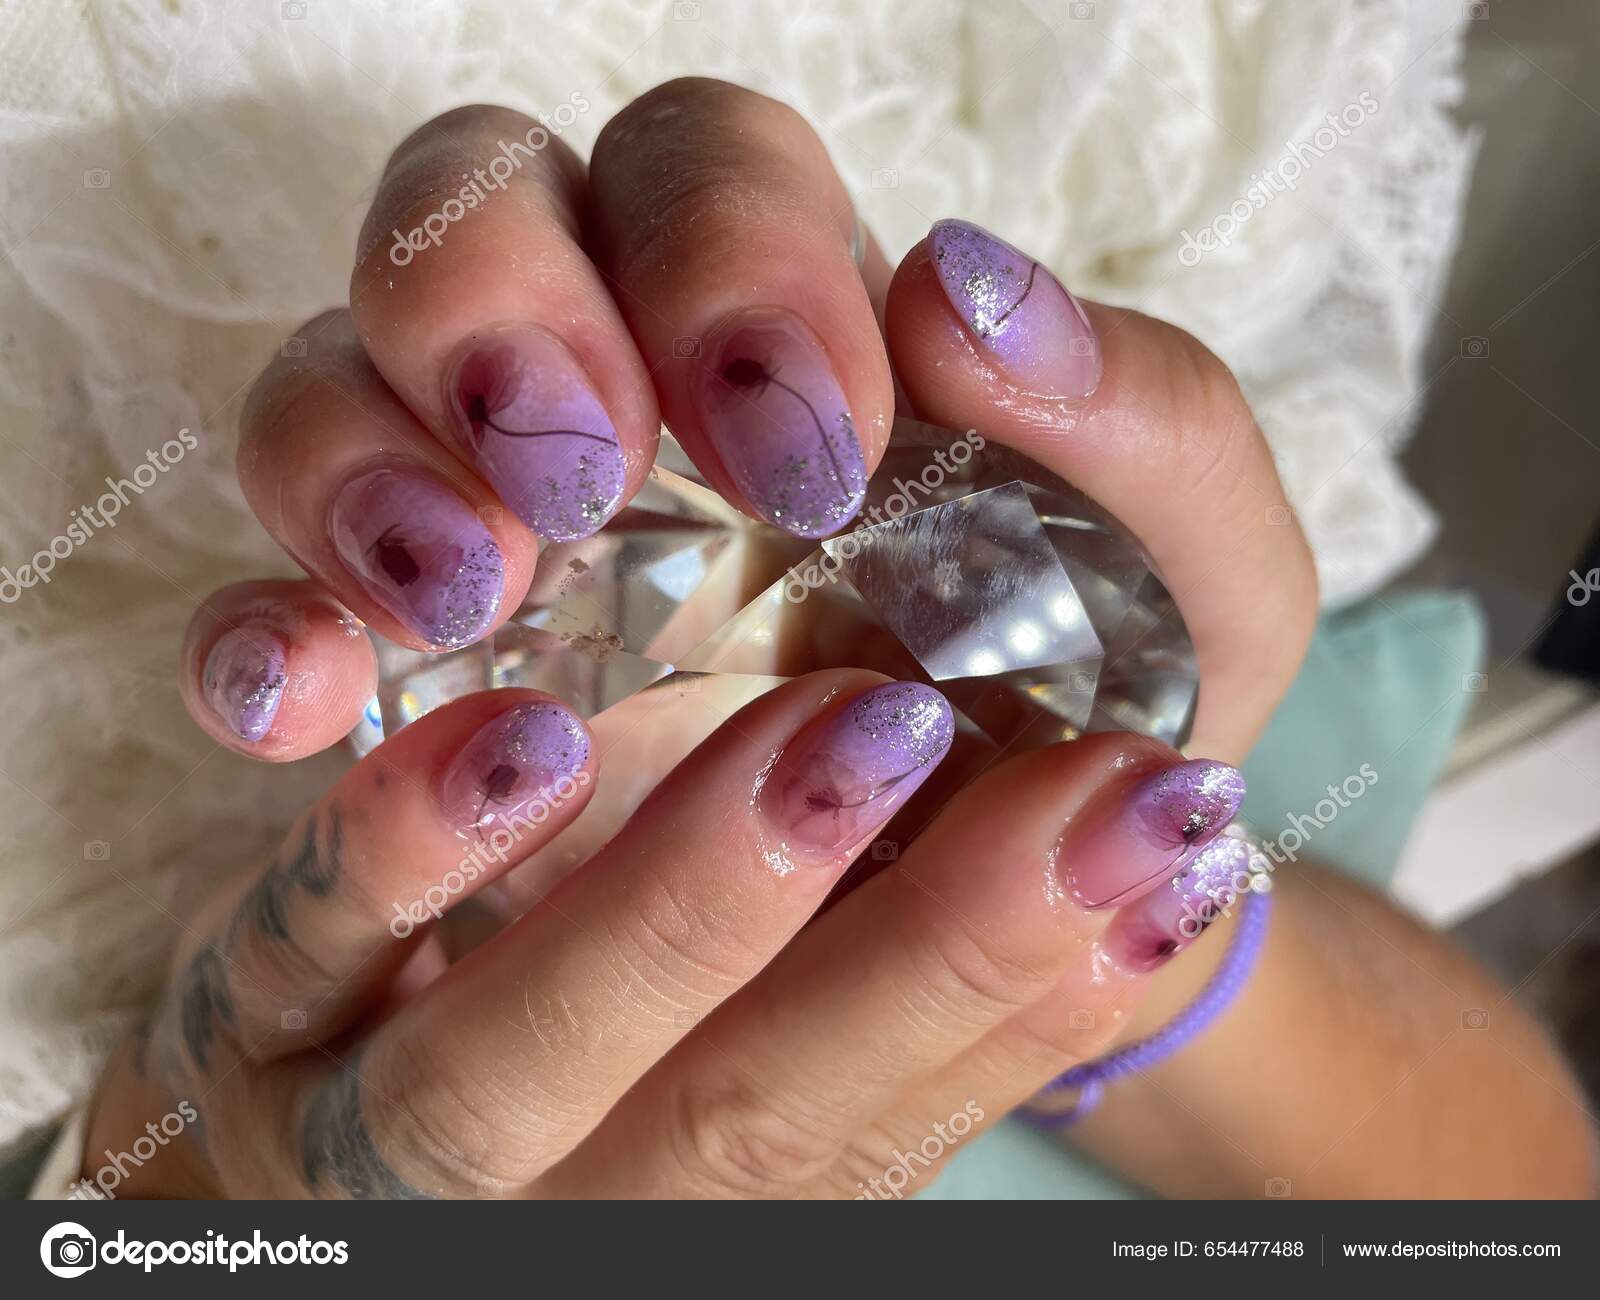 Nail extension design - Beauty, Hair & Makeup - Forum Weddingwire.in